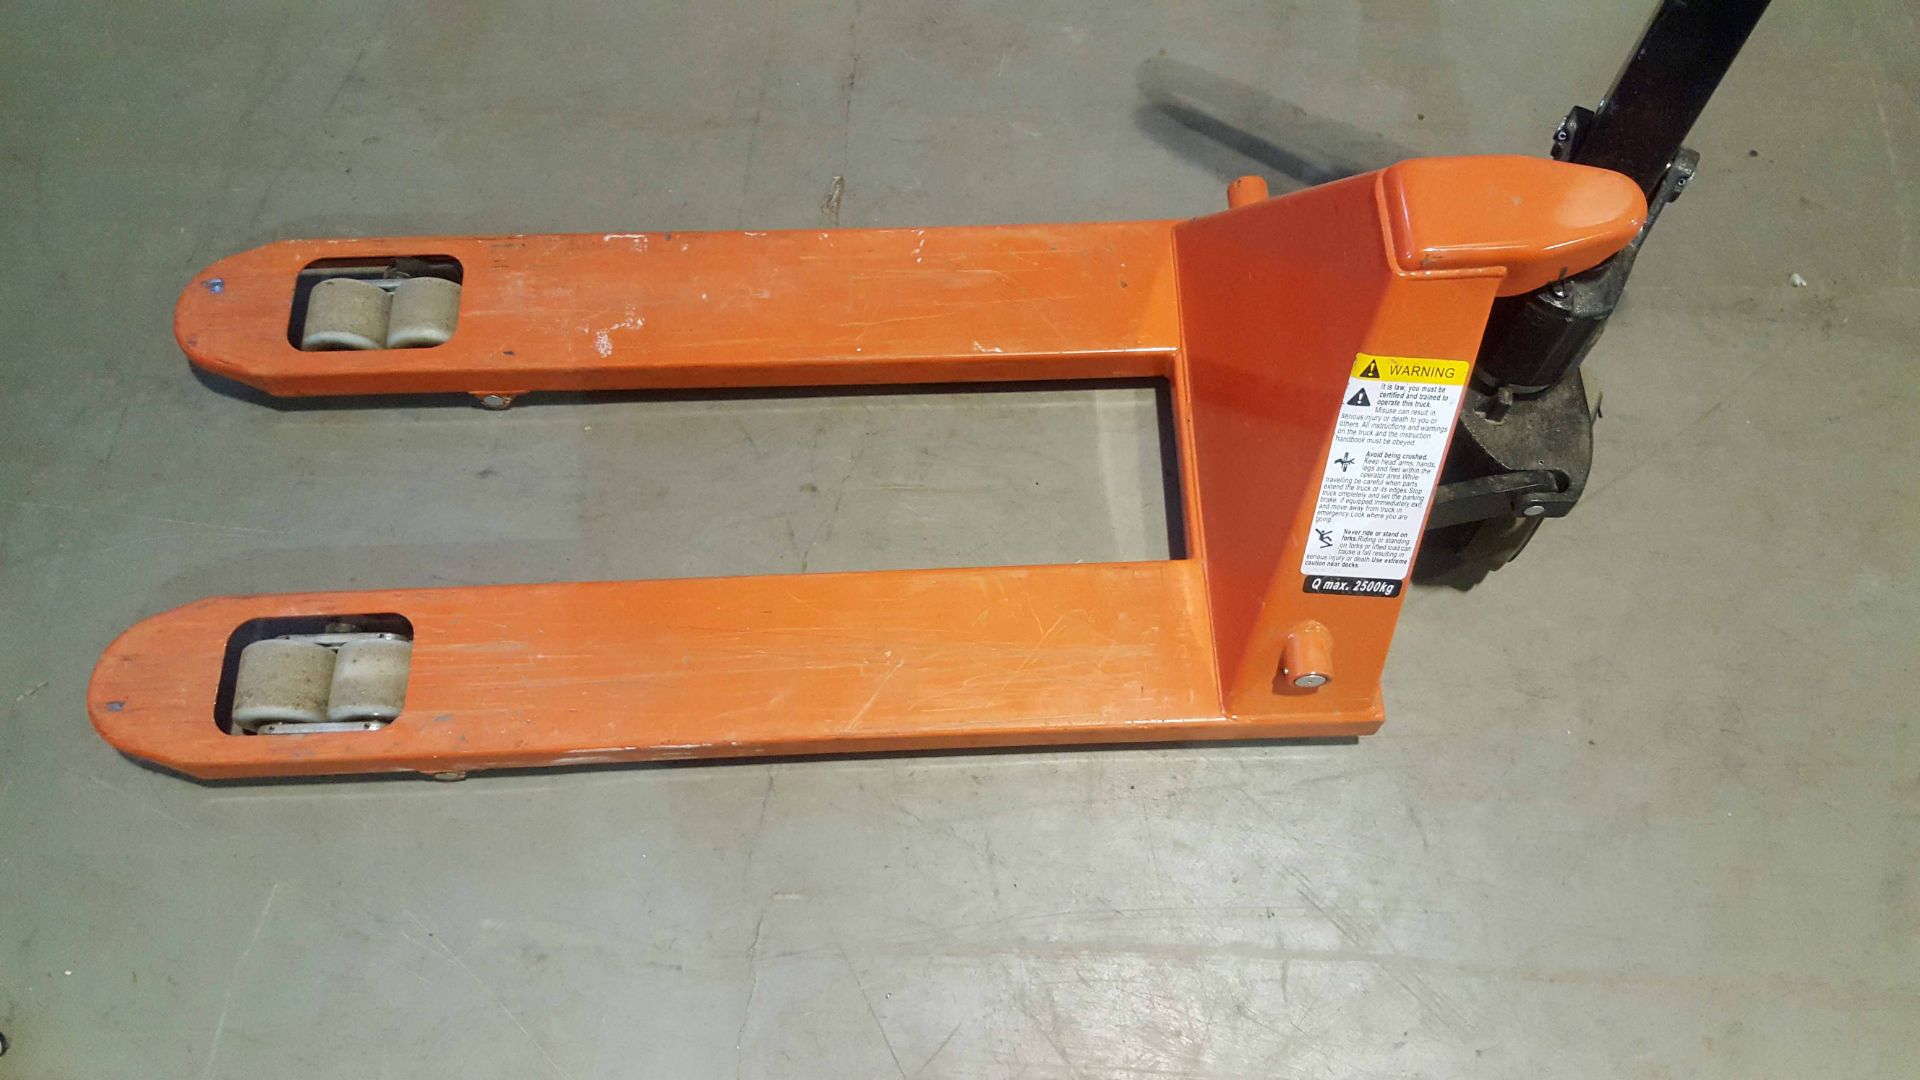 A 2500kg RECORD Manual Hydraulic Pallet Truck (as photographed)